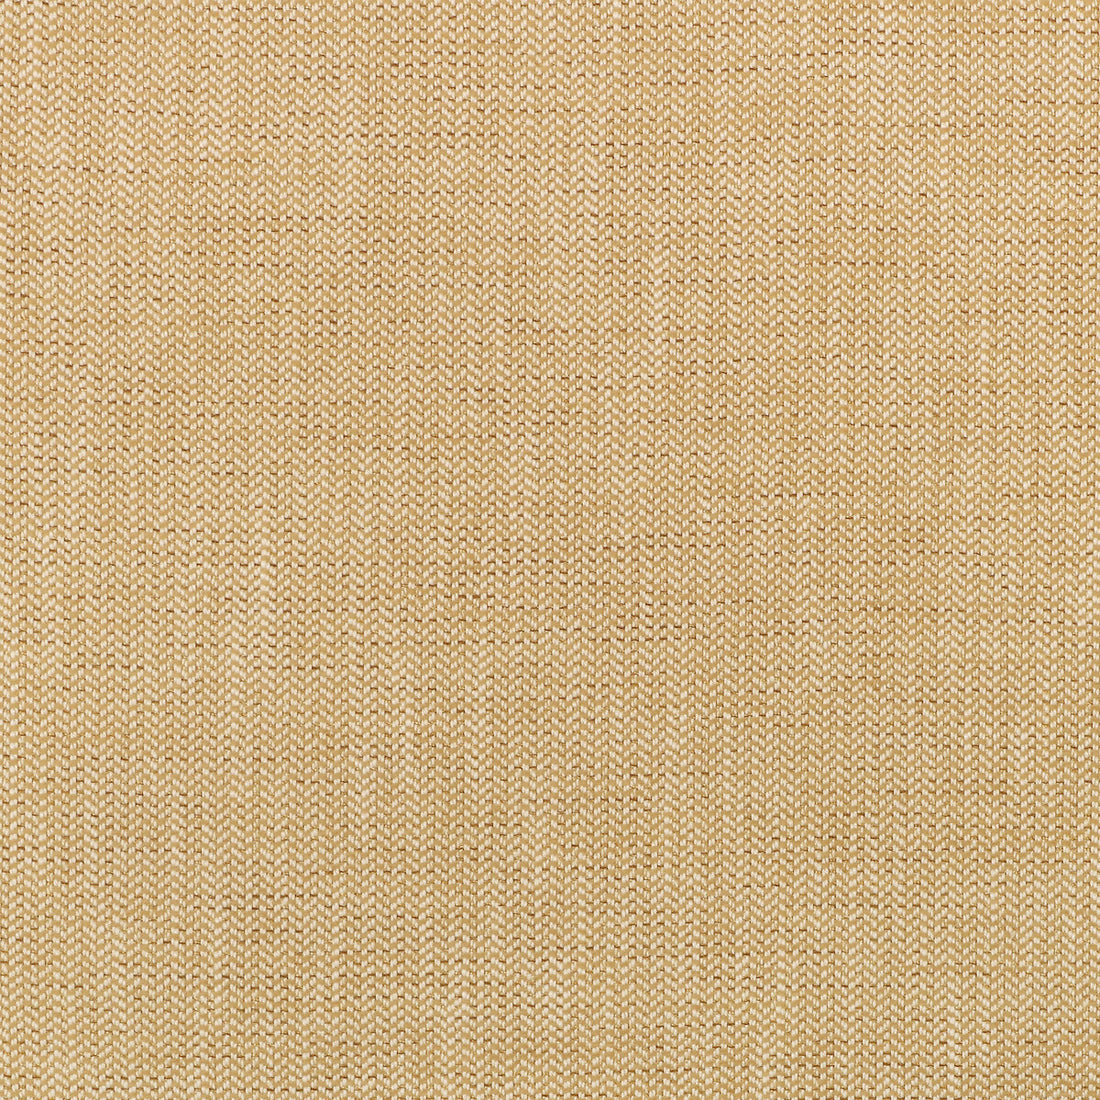 Kravet Smart fabric in 35514-14 color - pattern 35514.14.0 - by Kravet Smart in the Inside Out Performance Fabrics collection